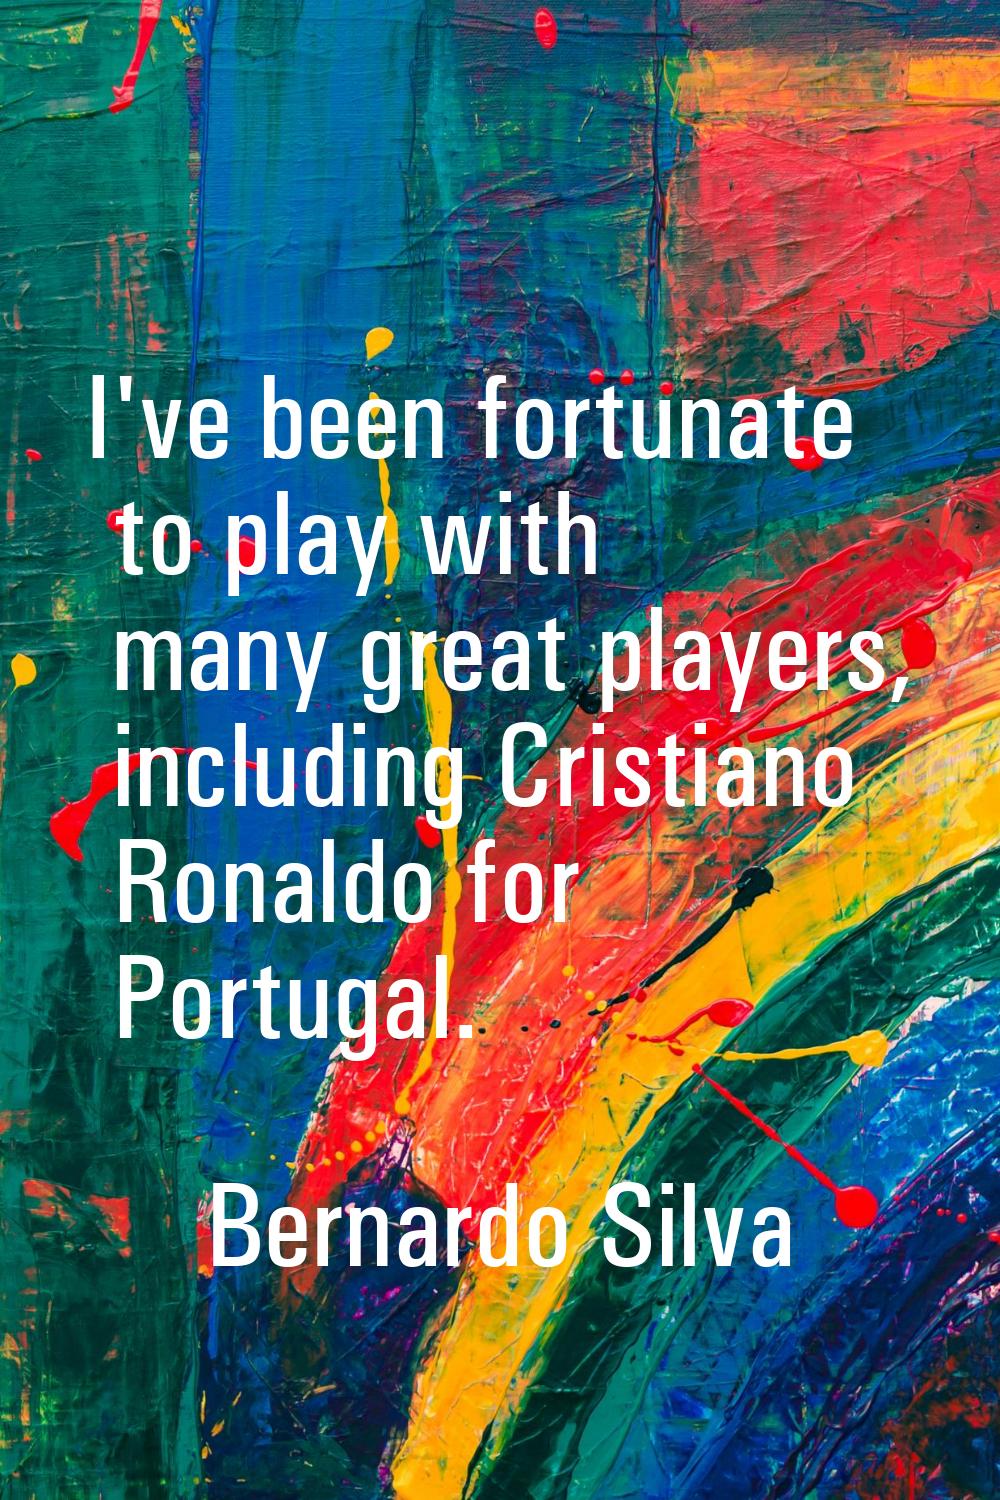 I've been fortunate to play with many great players, including Cristiano Ronaldo for Portugal.